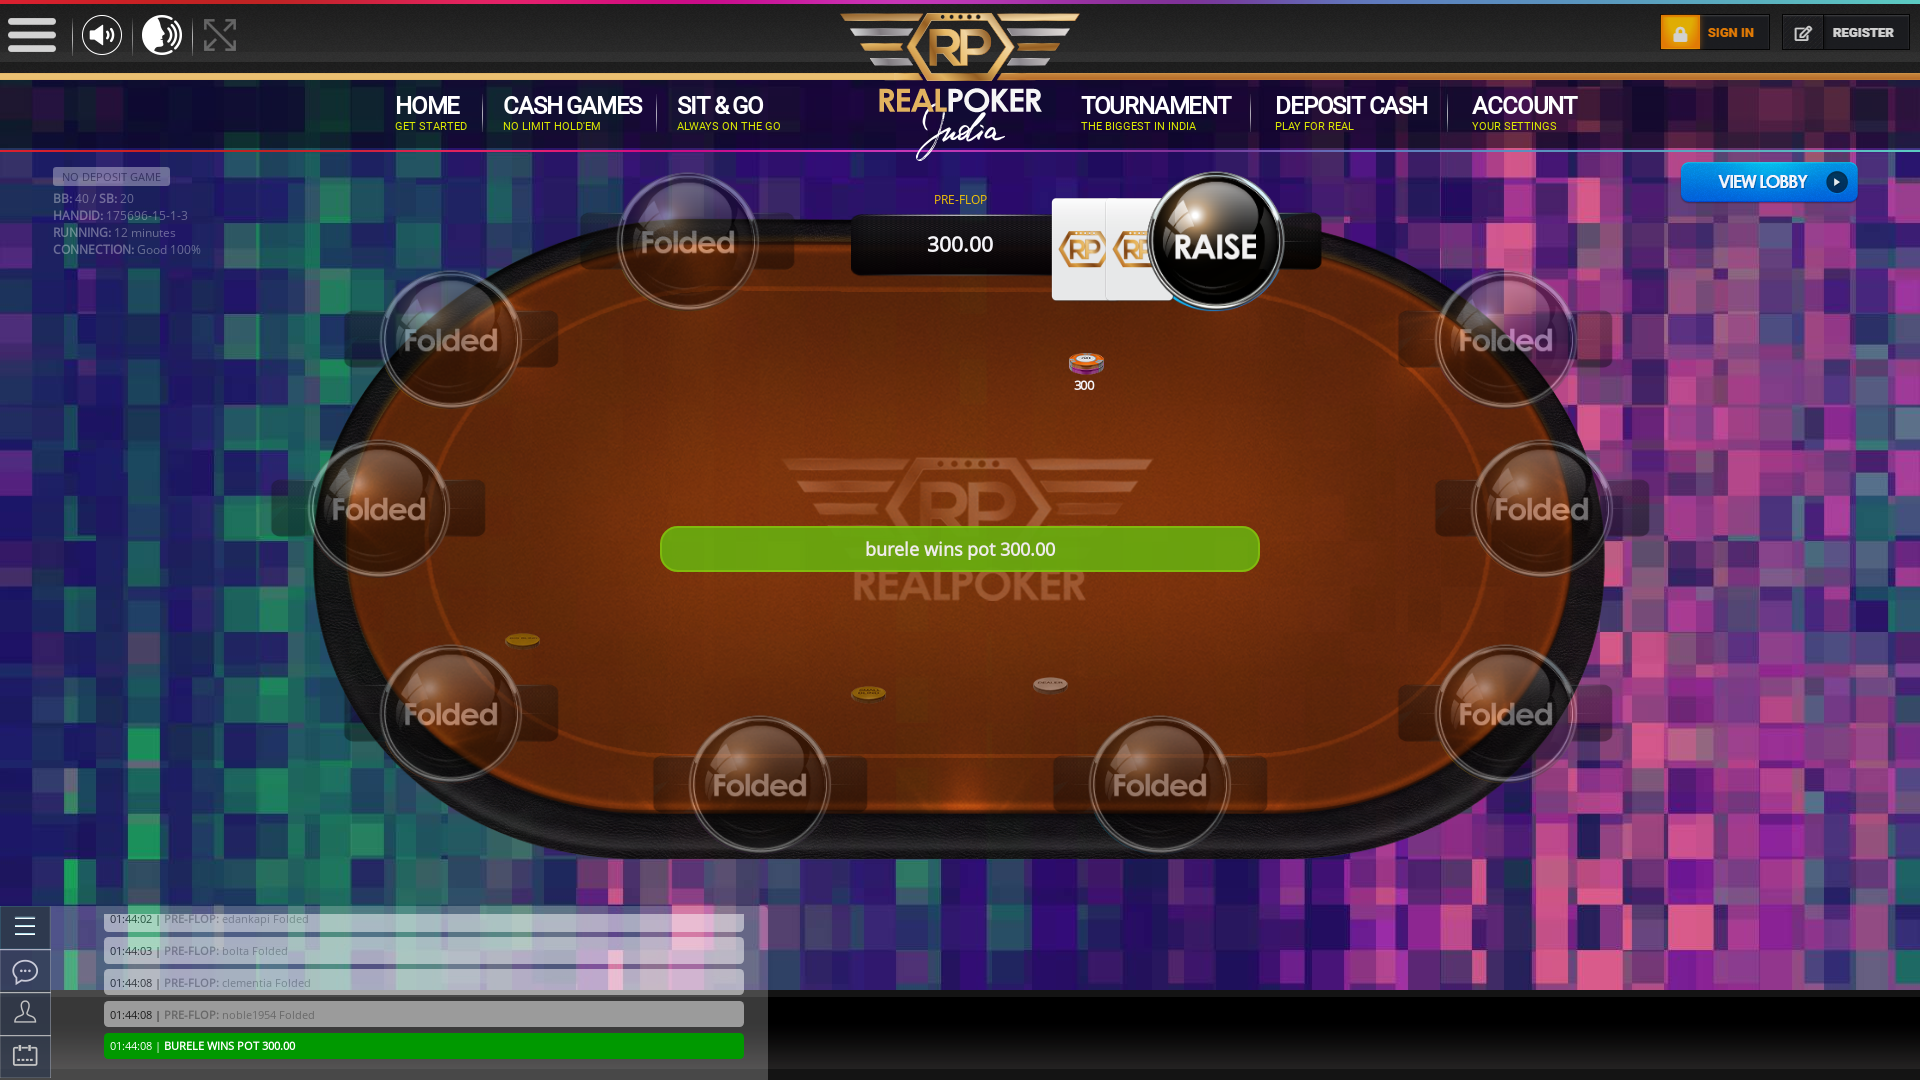 10 player texas holdem table at real poker with the table id 175696